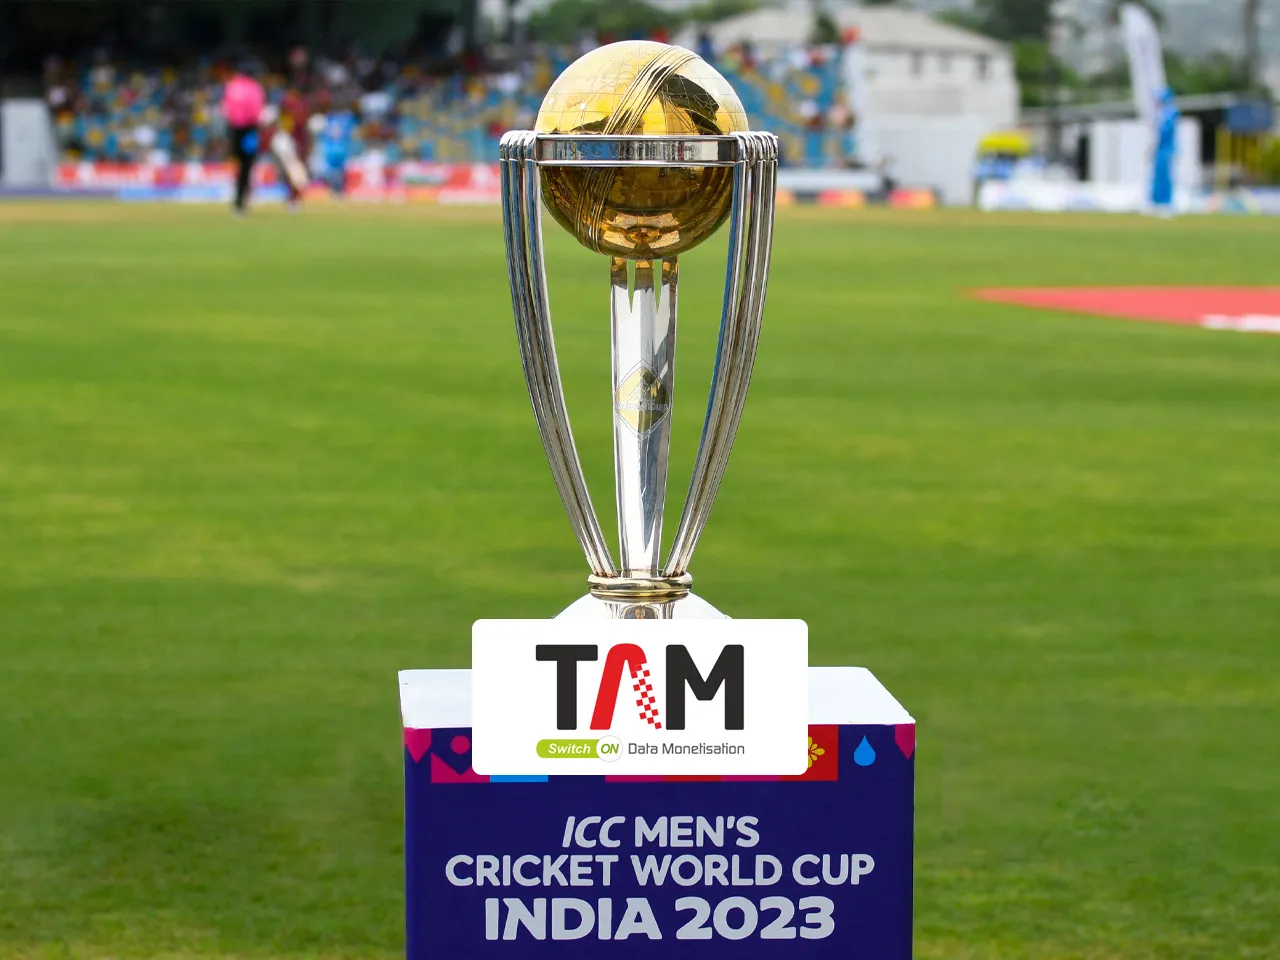 Advertisers grew by 14% in ICC World Cup 2023 compared to 2019: Report